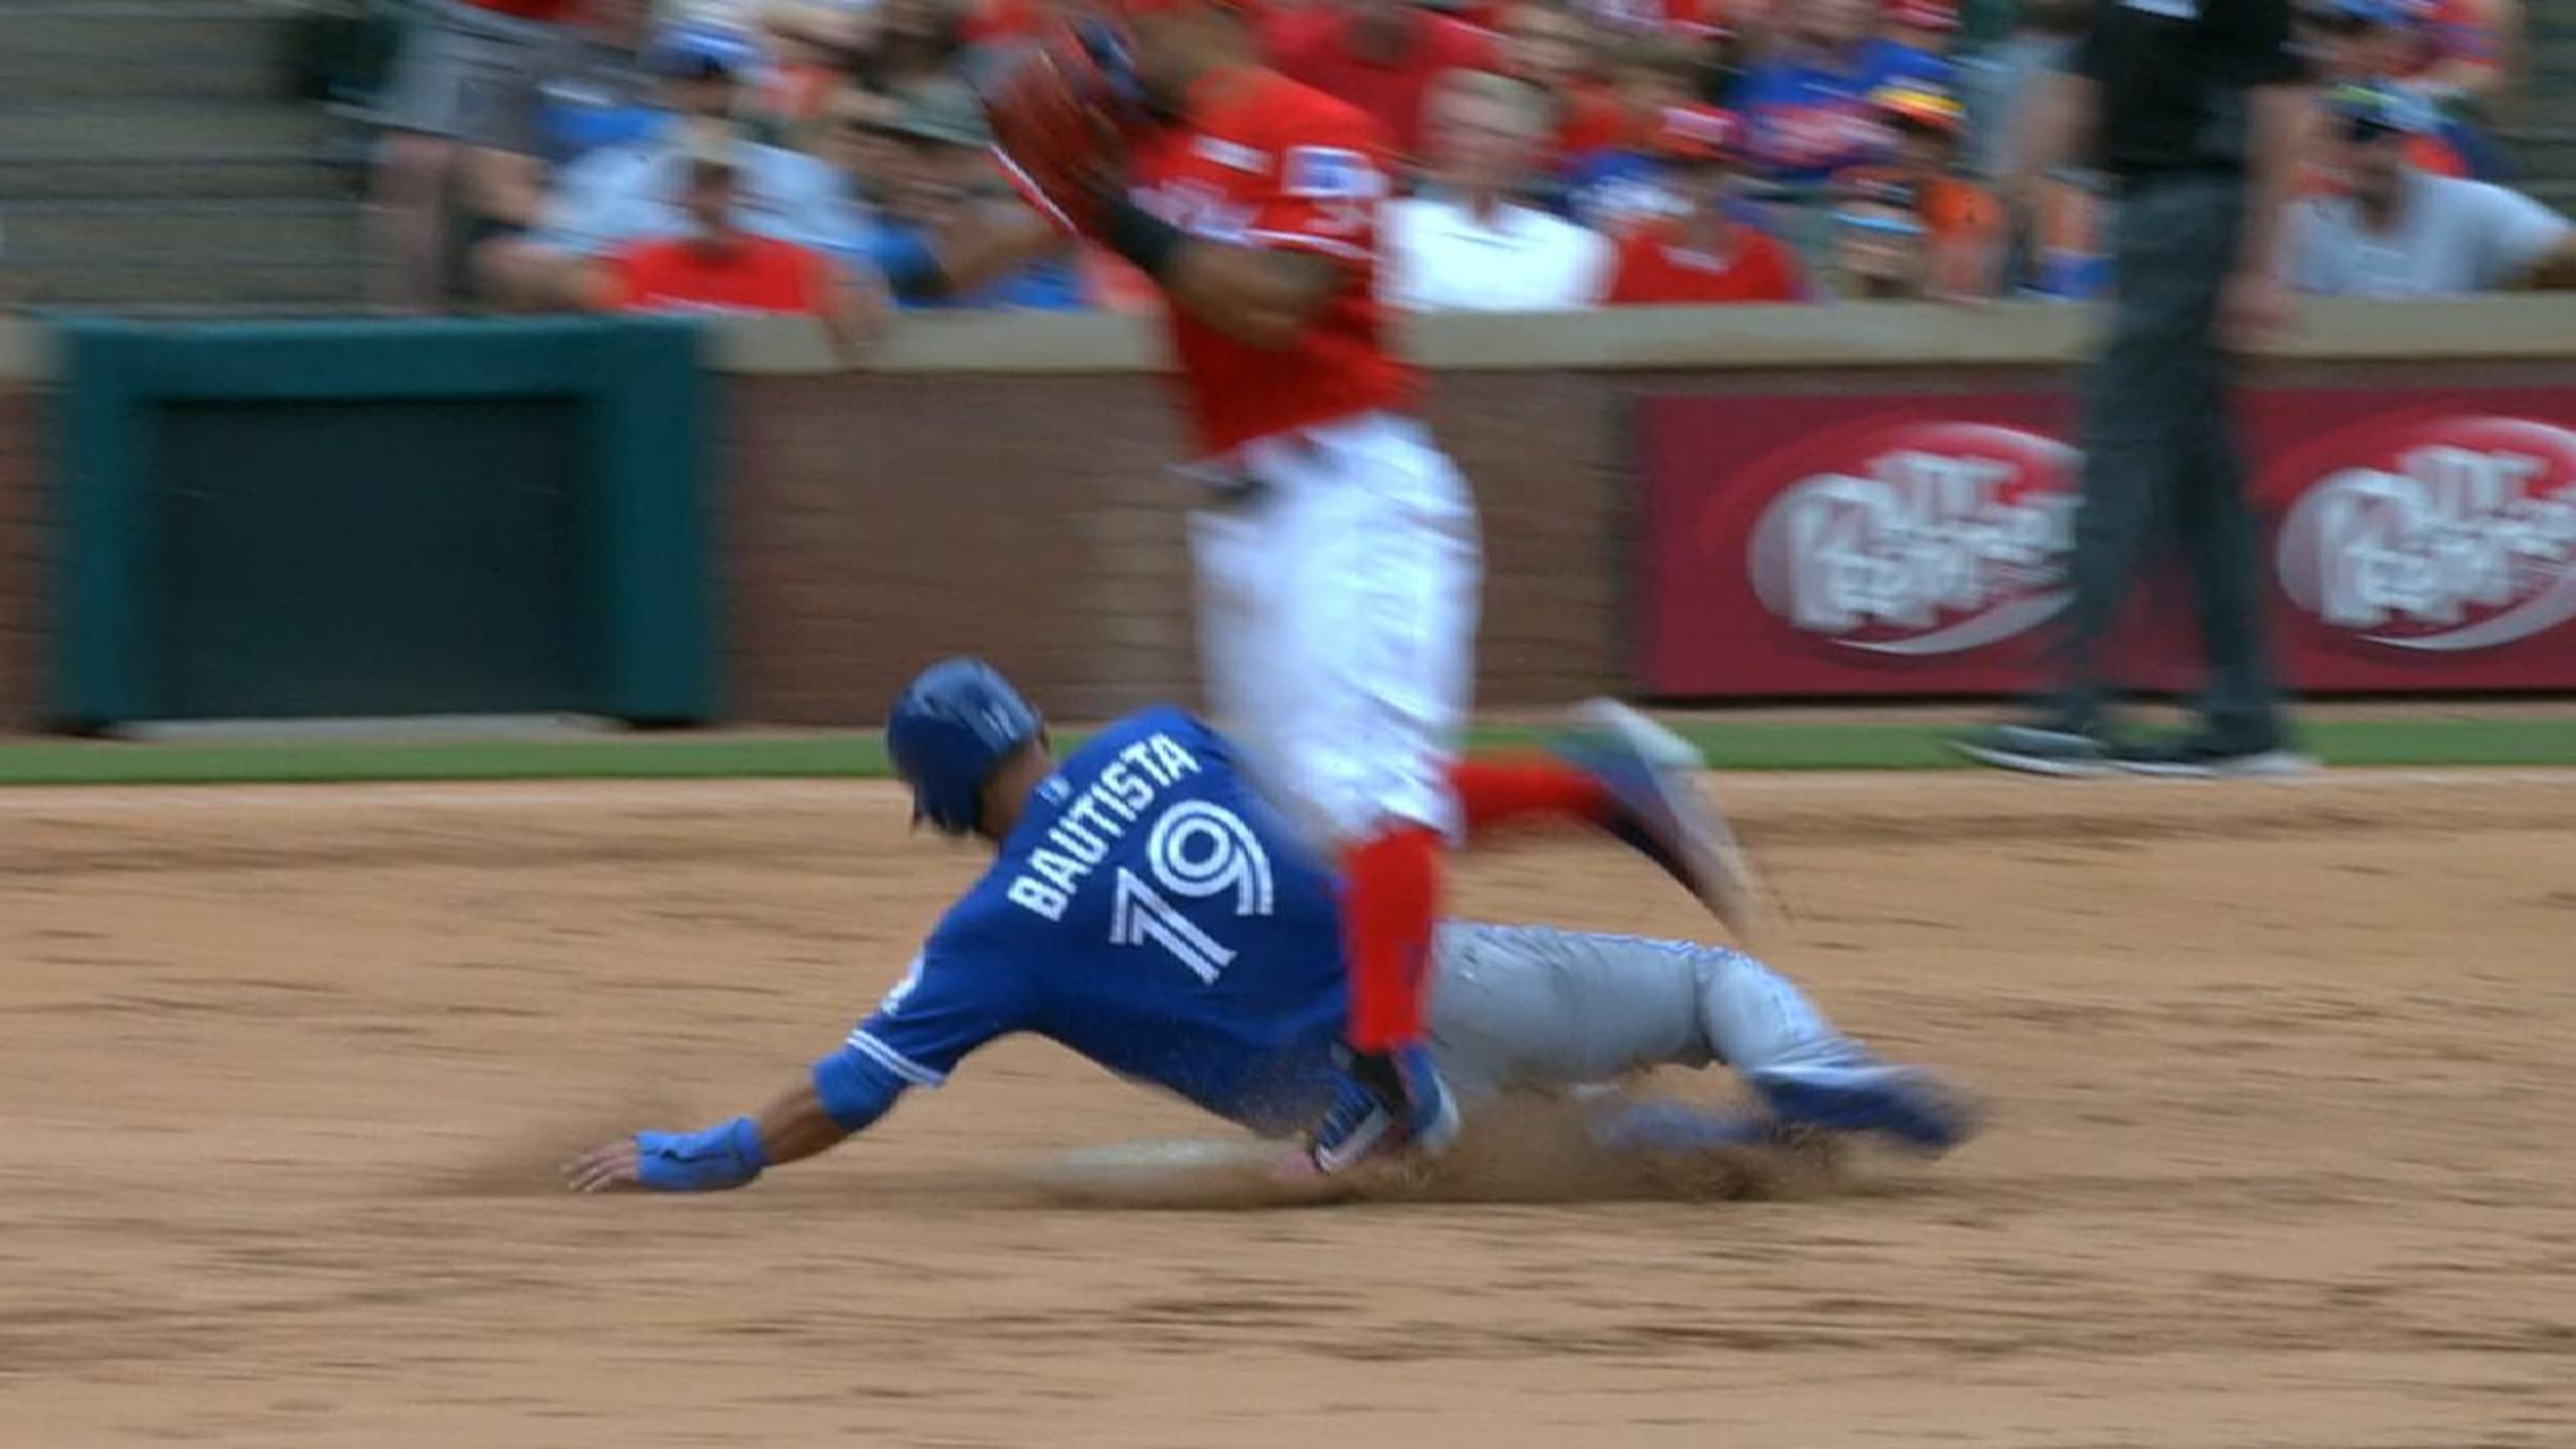 Rougned Odor punches Bautista in the jaw. MUST SEE ! ( SLOW MOTION